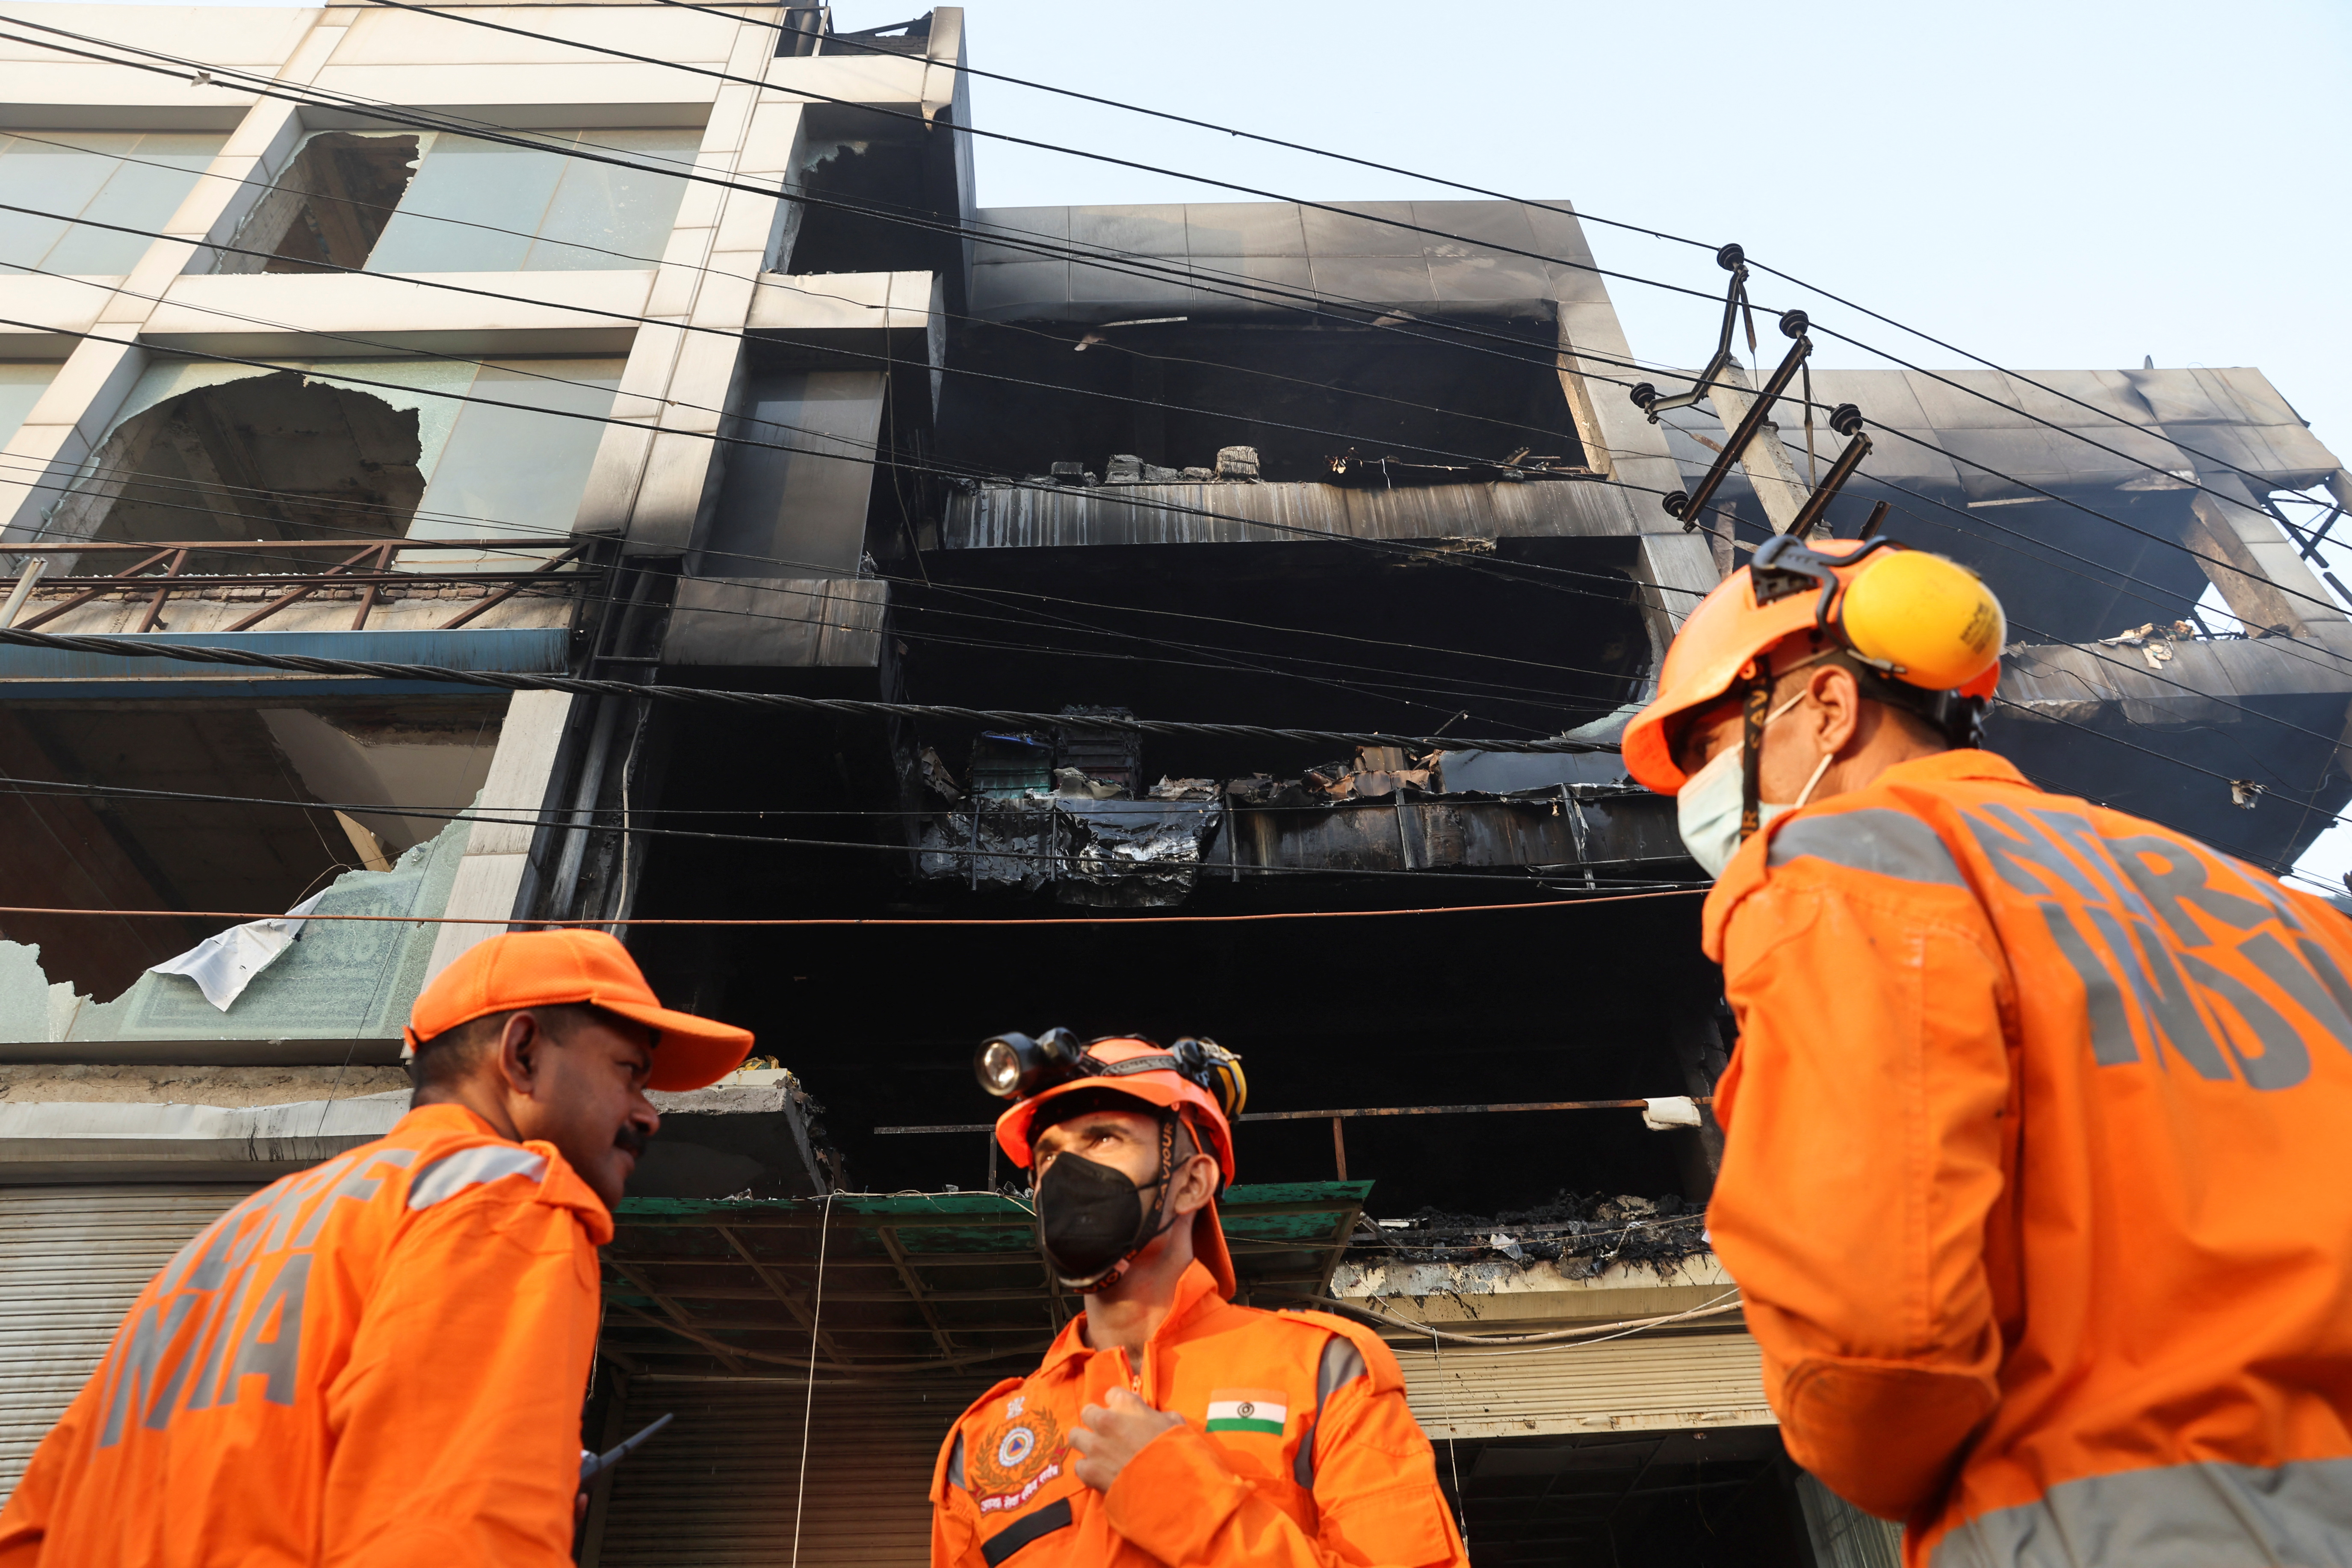 National Disaster Response Force (NDRF) and fire brigade personnel conduct a search and rescue operation after a fire broke out in a commercial building, in New Delhi